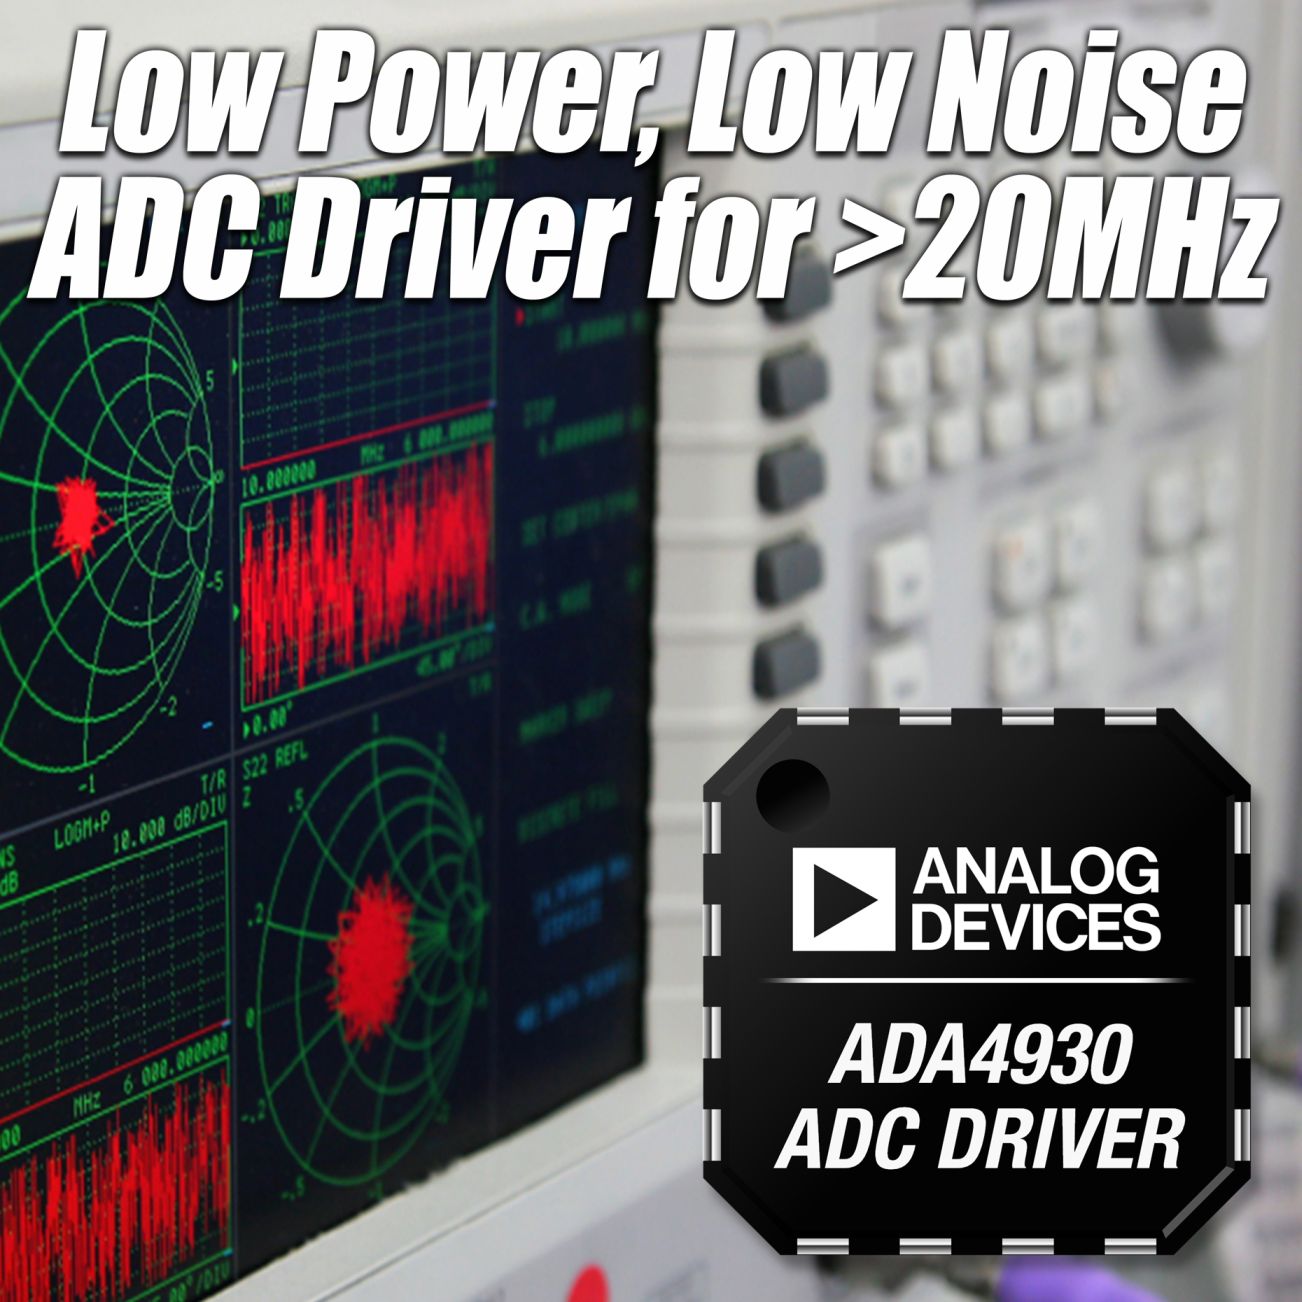 Analog Devices Releases Low-Power Single-Supply ADC Drivers for Low-Voltage, 14-Bit Converters